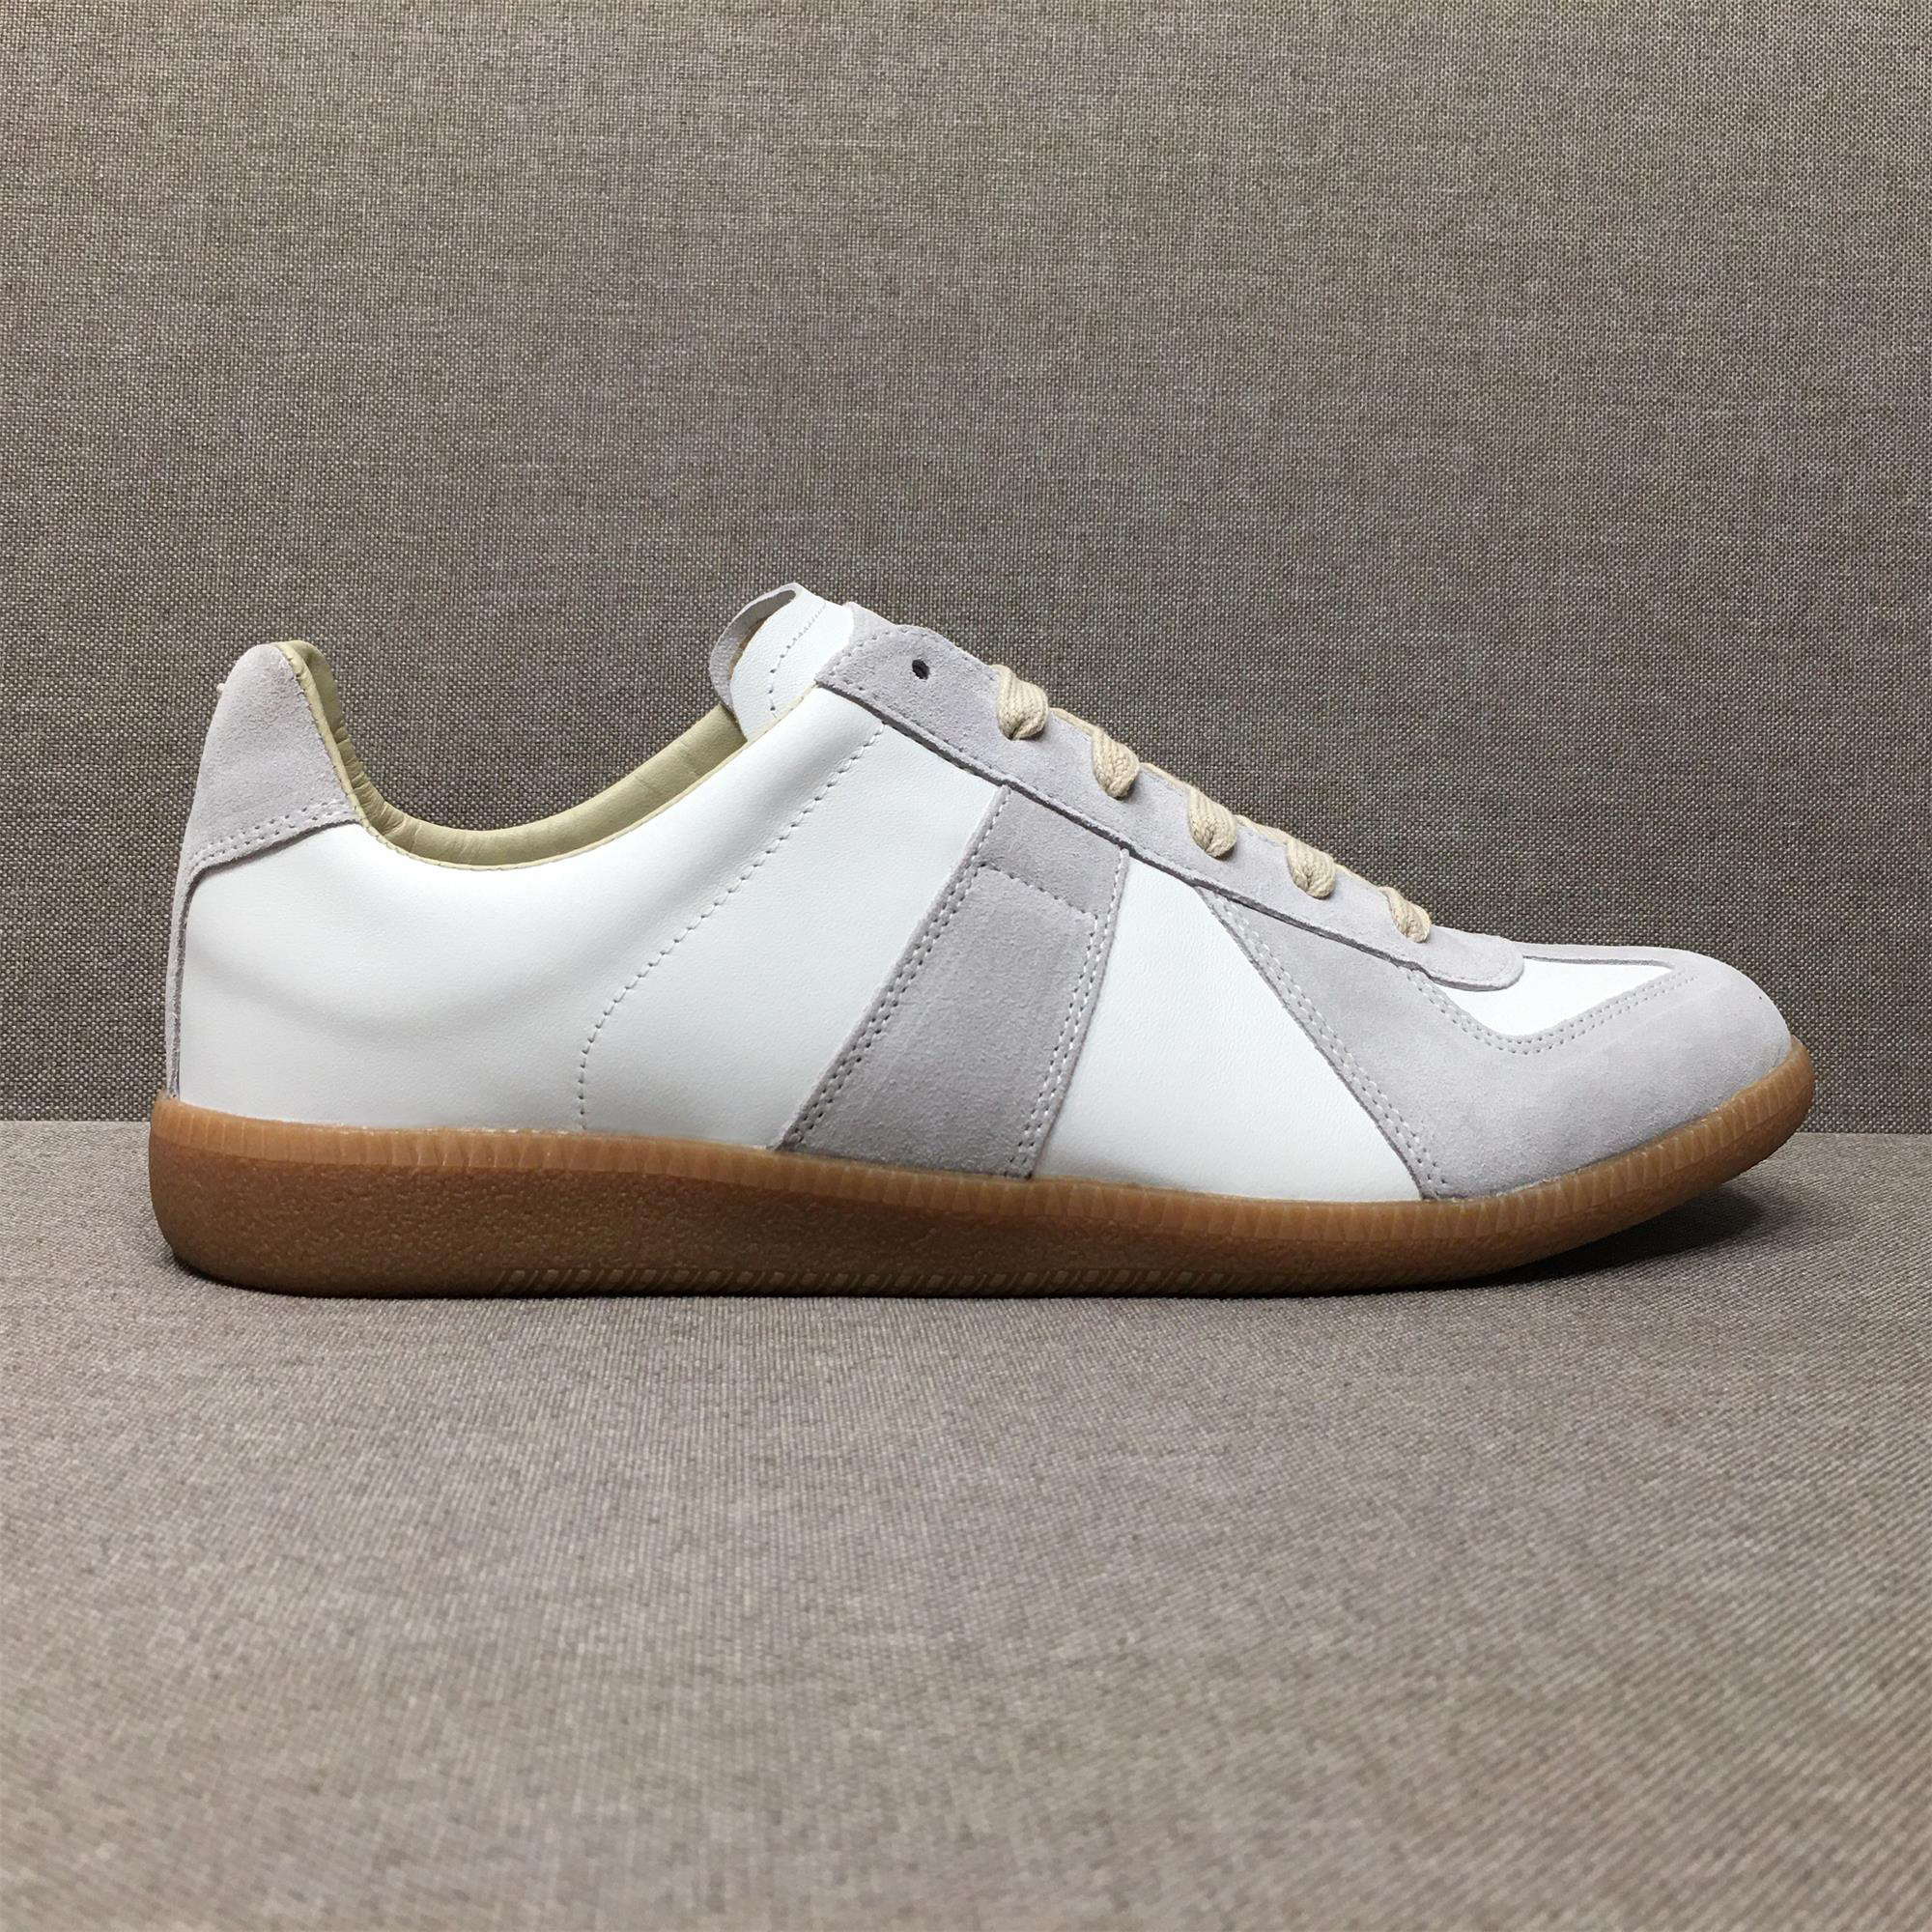 thumbnail for Shoe Player Craftsmanship Produces Moral Training Shoes MMGAT Retro Small White Shoes Raw Rubber Flat Bottom Sports Shoes Board Shoes